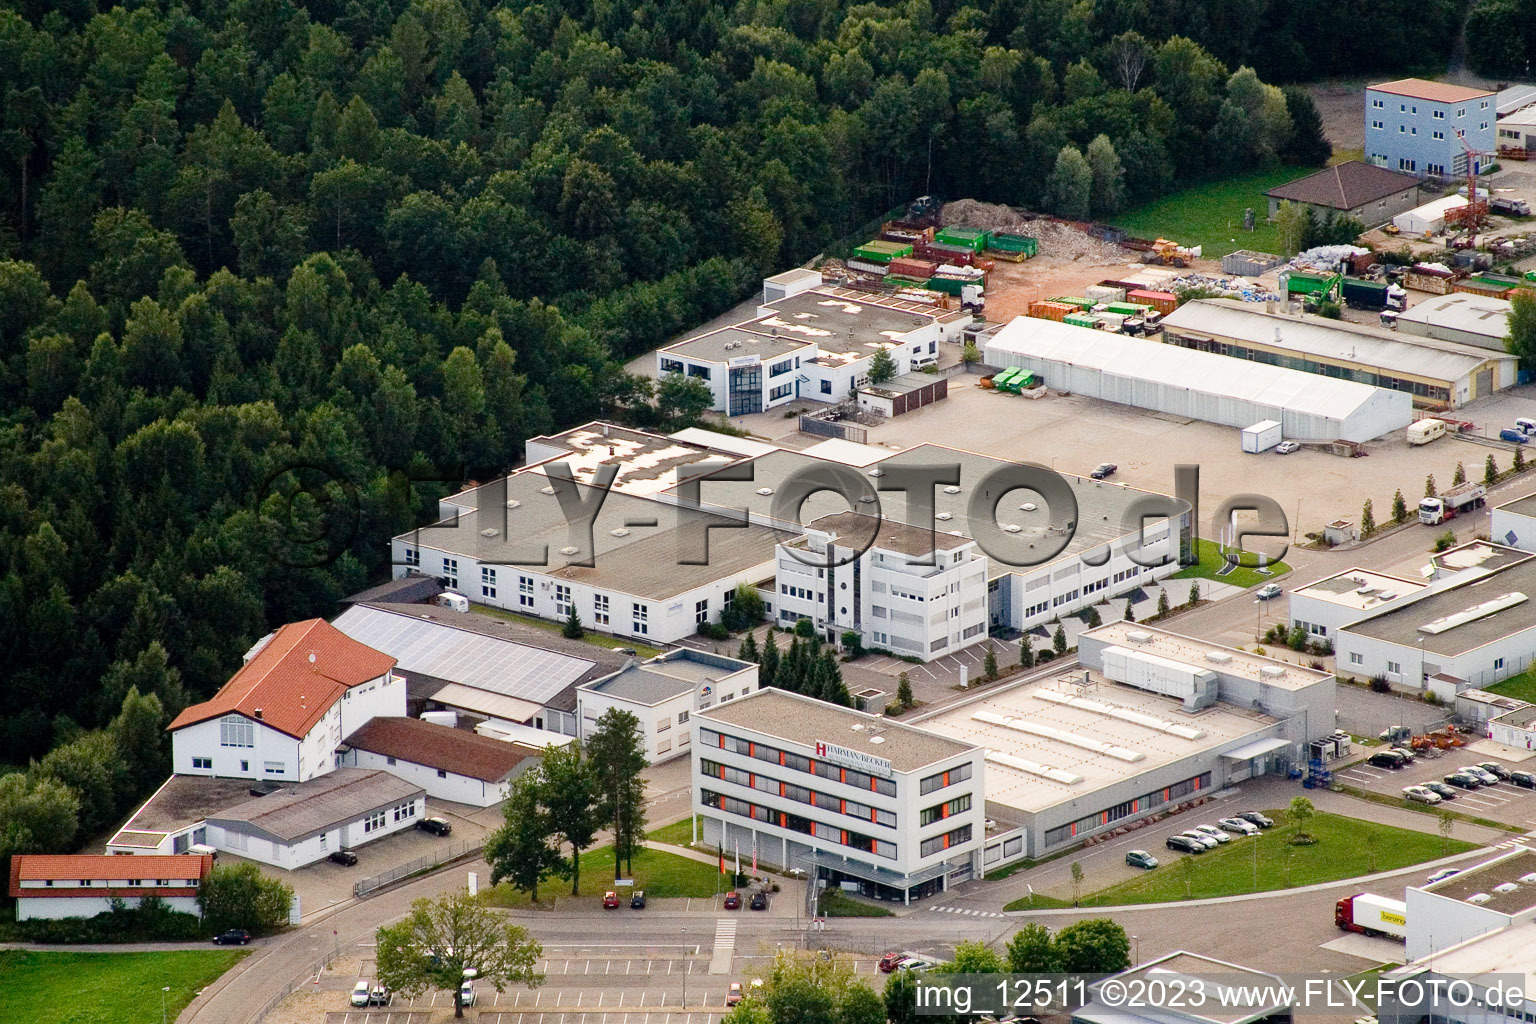 Ittersbach, industrial area in the district Im Stockmädle in Karlsbad in the state Baden-Wuerttemberg, Germany from the drone perspective